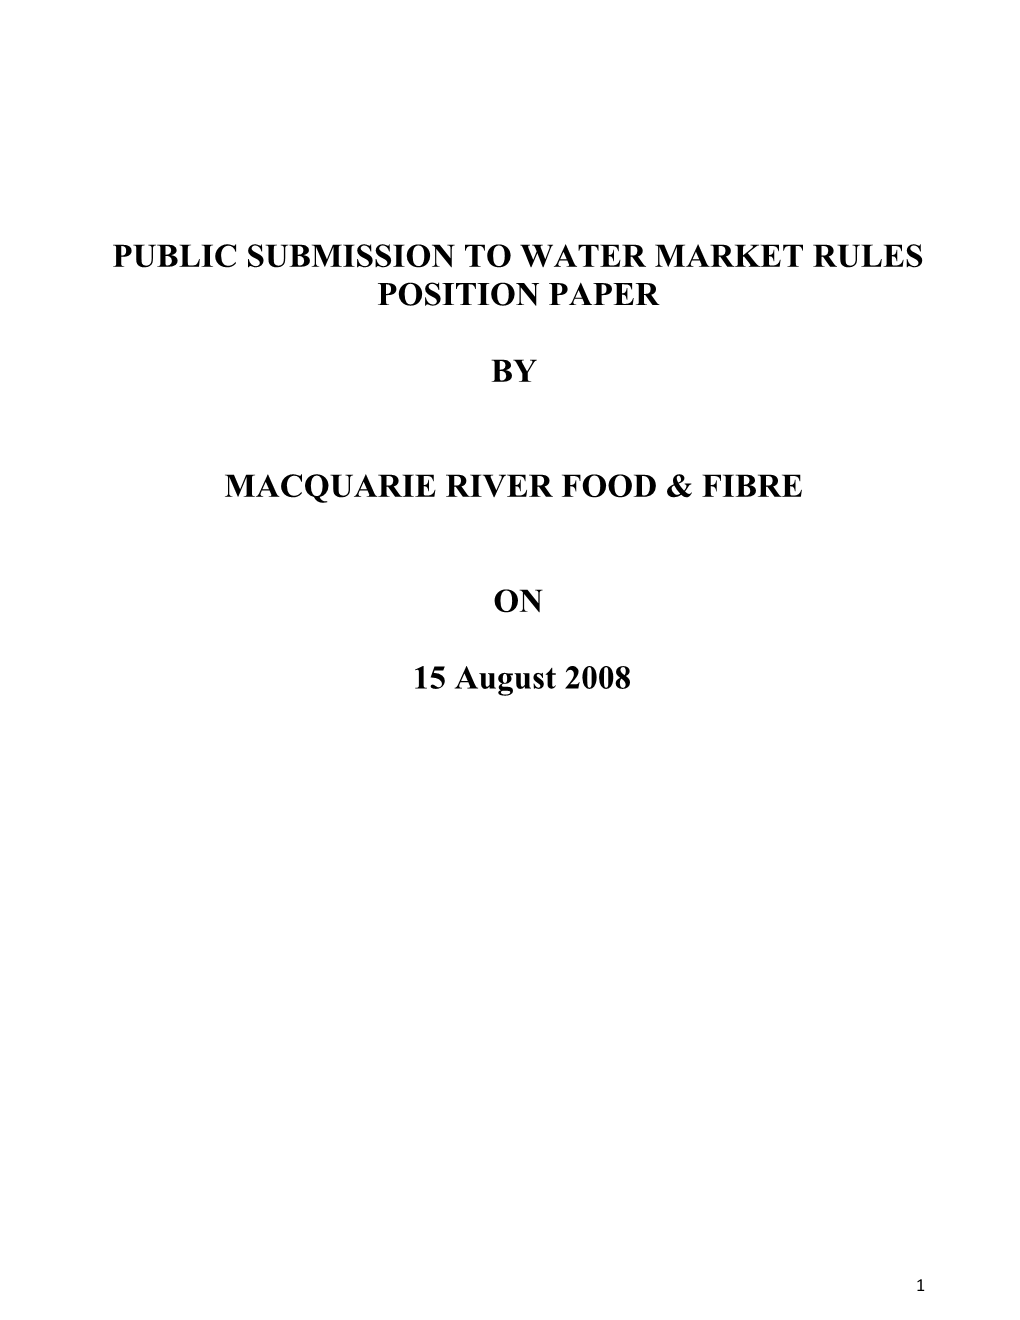 Public Submission to Water Market Rules Position Paper